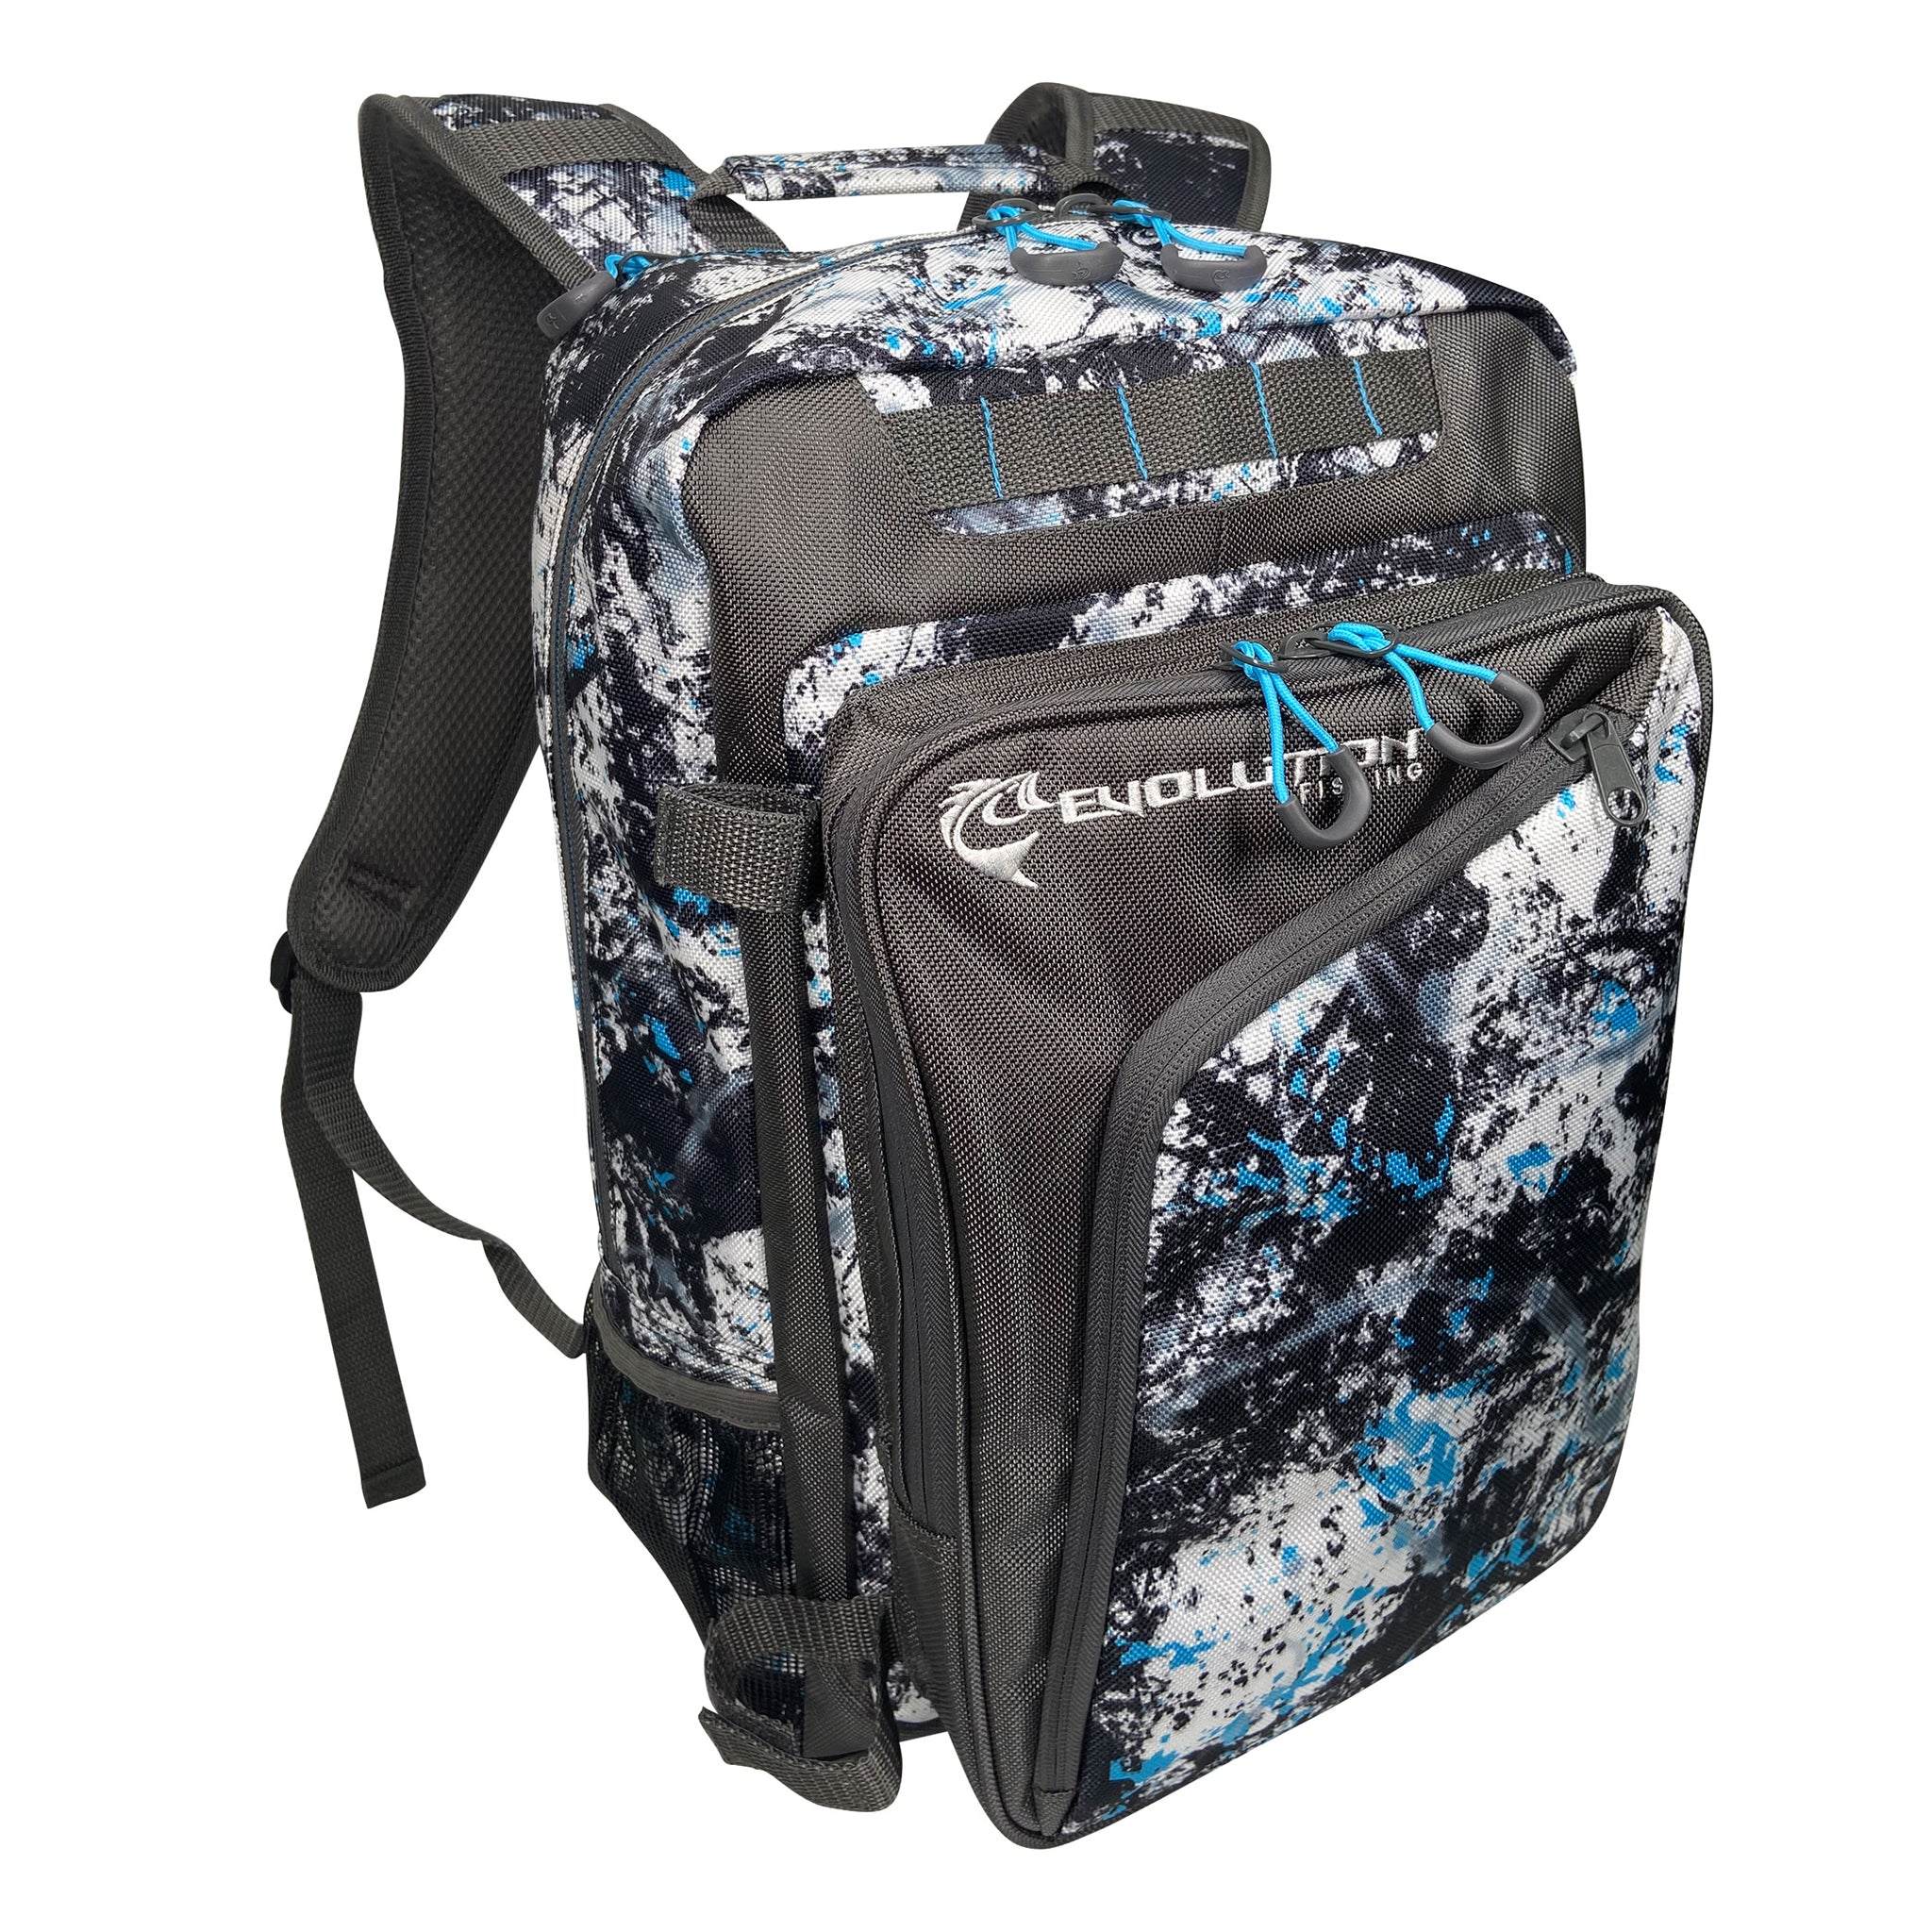  Ghosthorn Fishing Backpack with 2 3700 Tackle Boxes